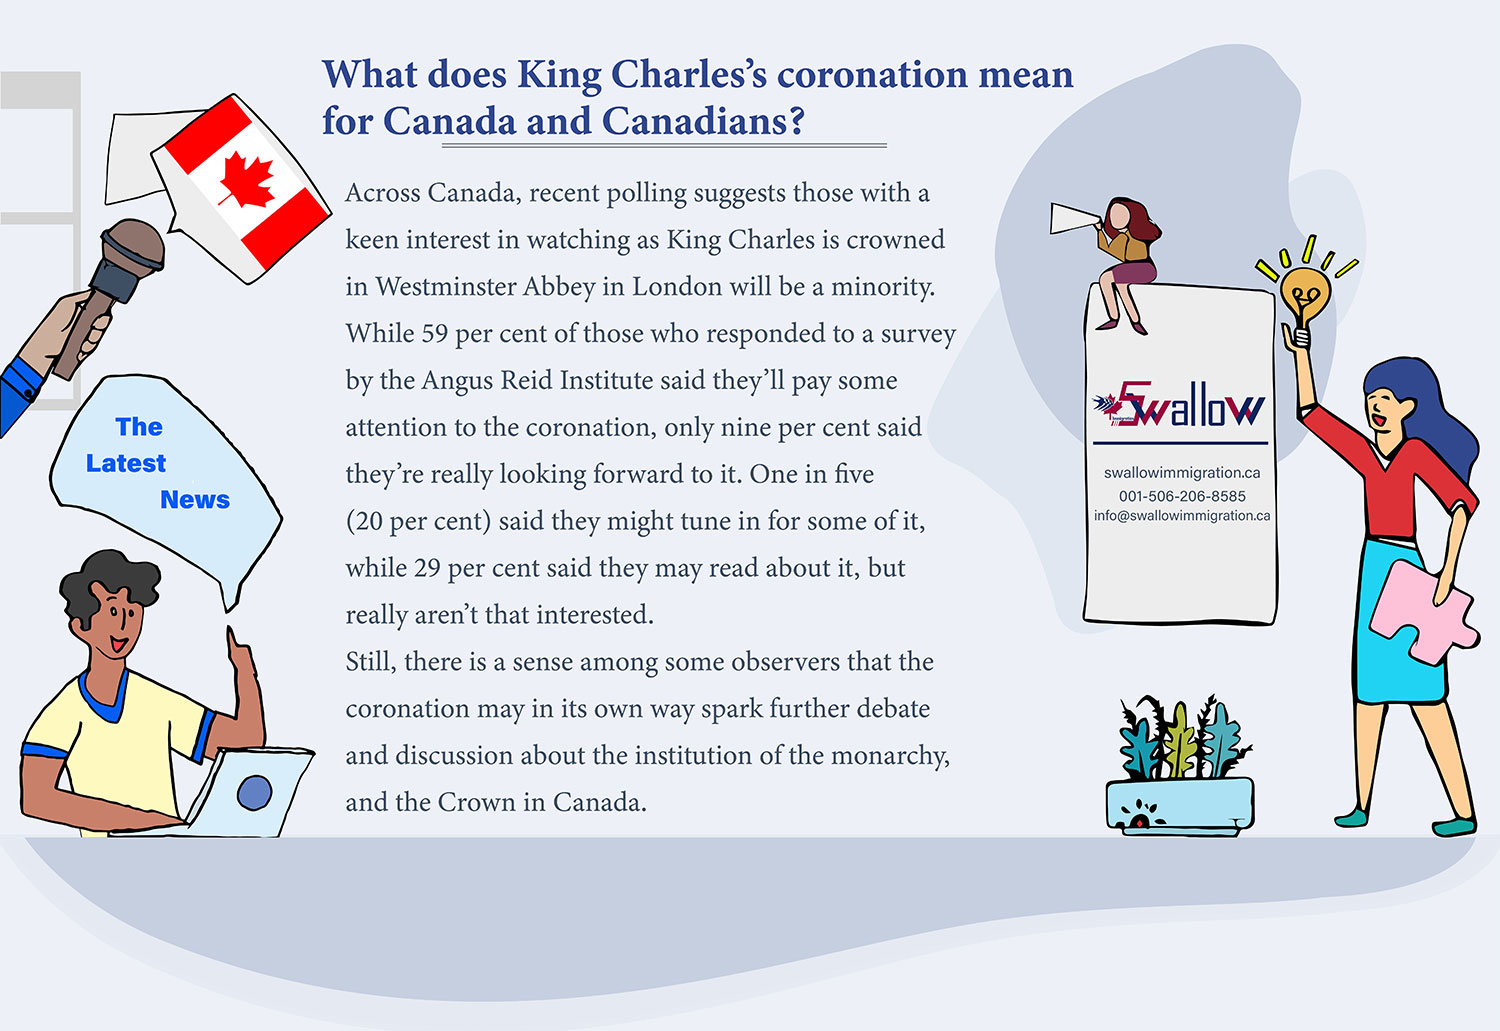 What does King Charles’s coronation mean for Canada and Canadians?